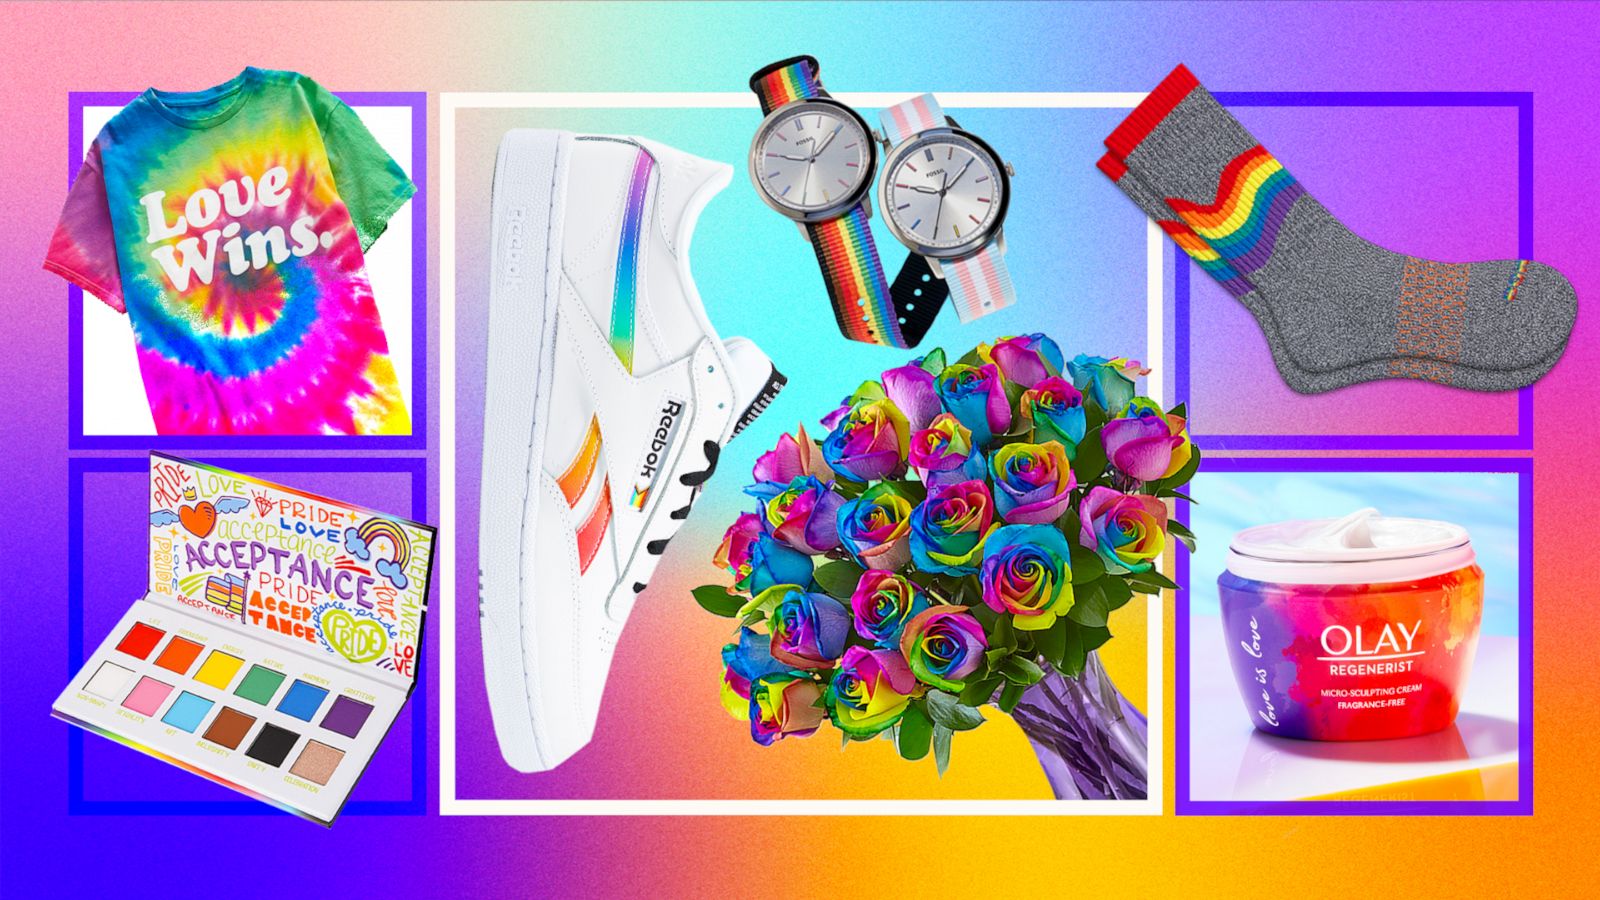 Check Out Hanna Andersson's Sweet New Collection for Pride Month